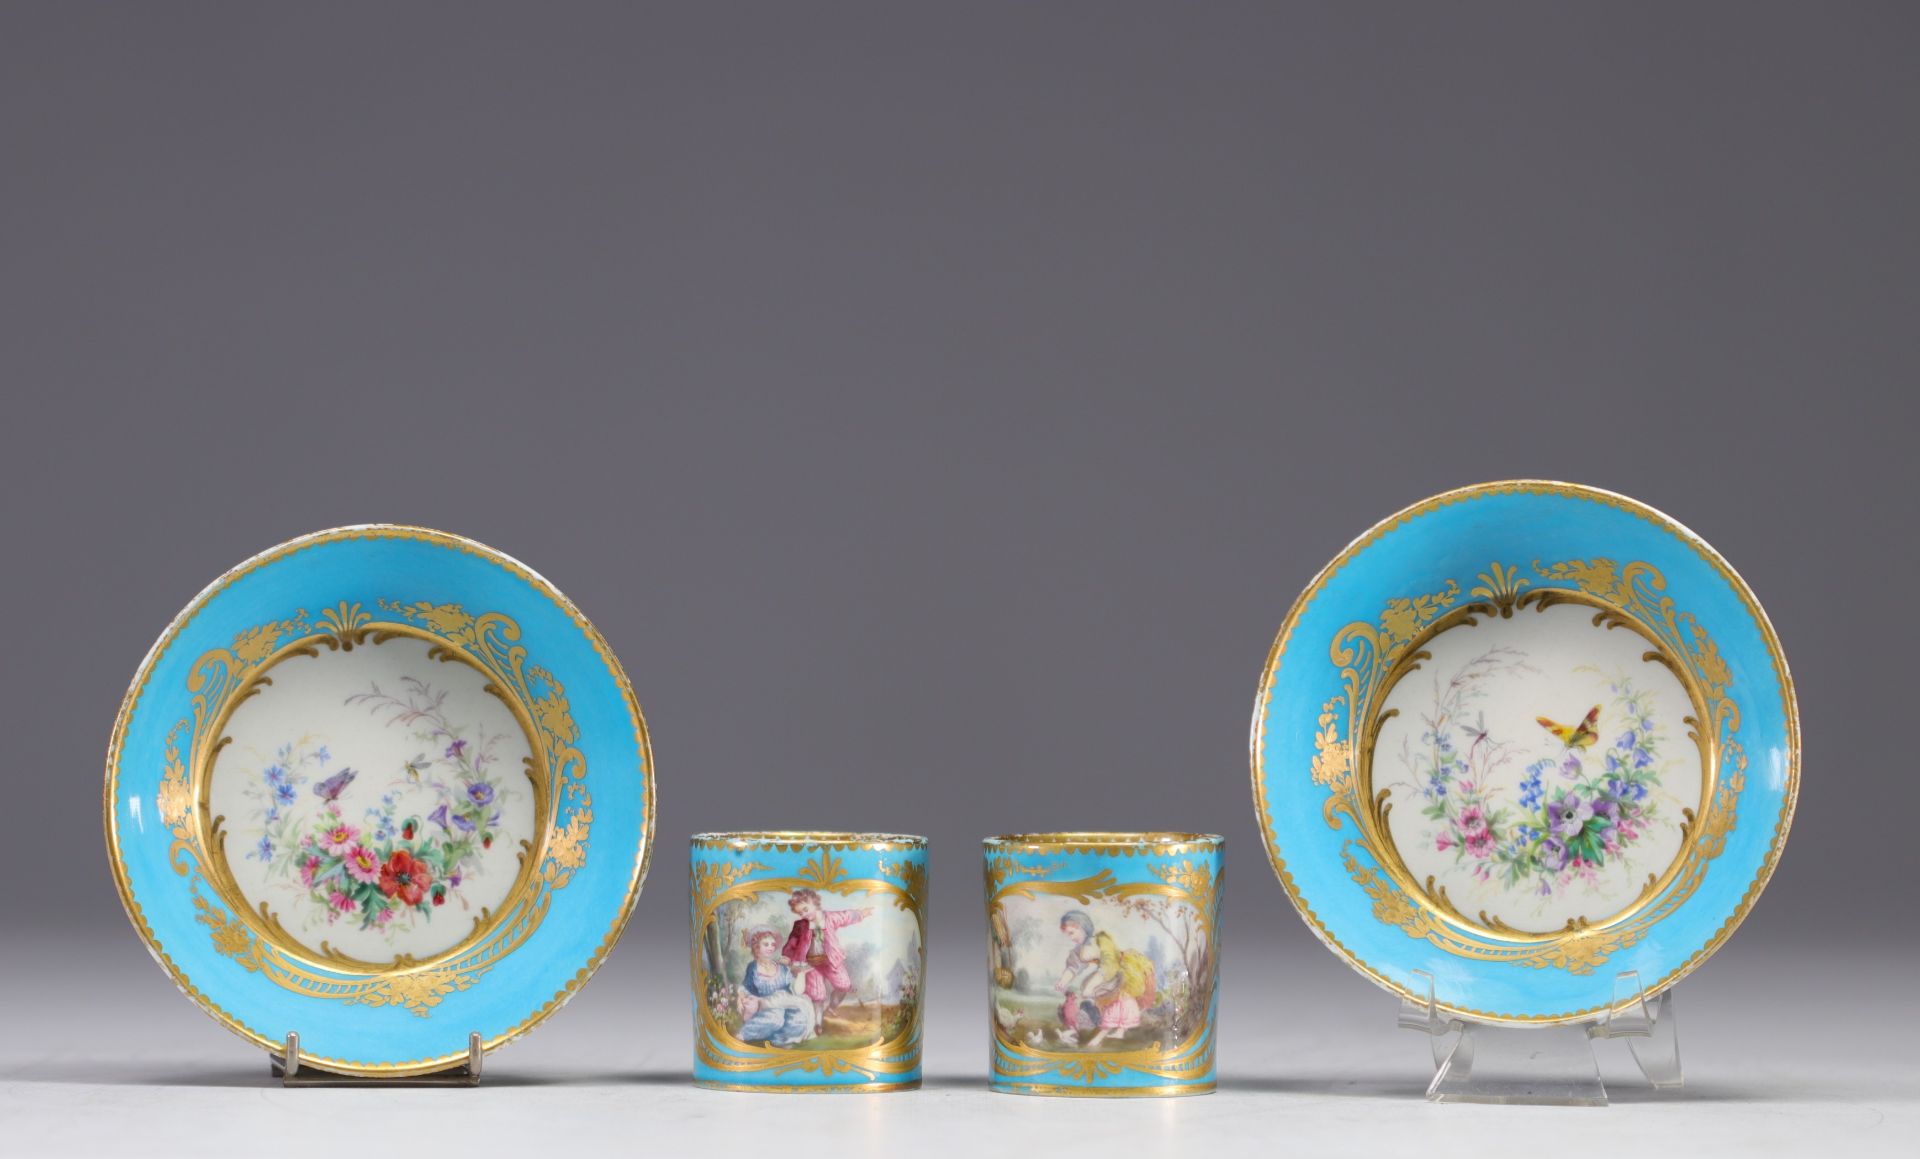 Tete a tete" service in Sevres porcelain on a celestial blue background. - Image 4 of 10